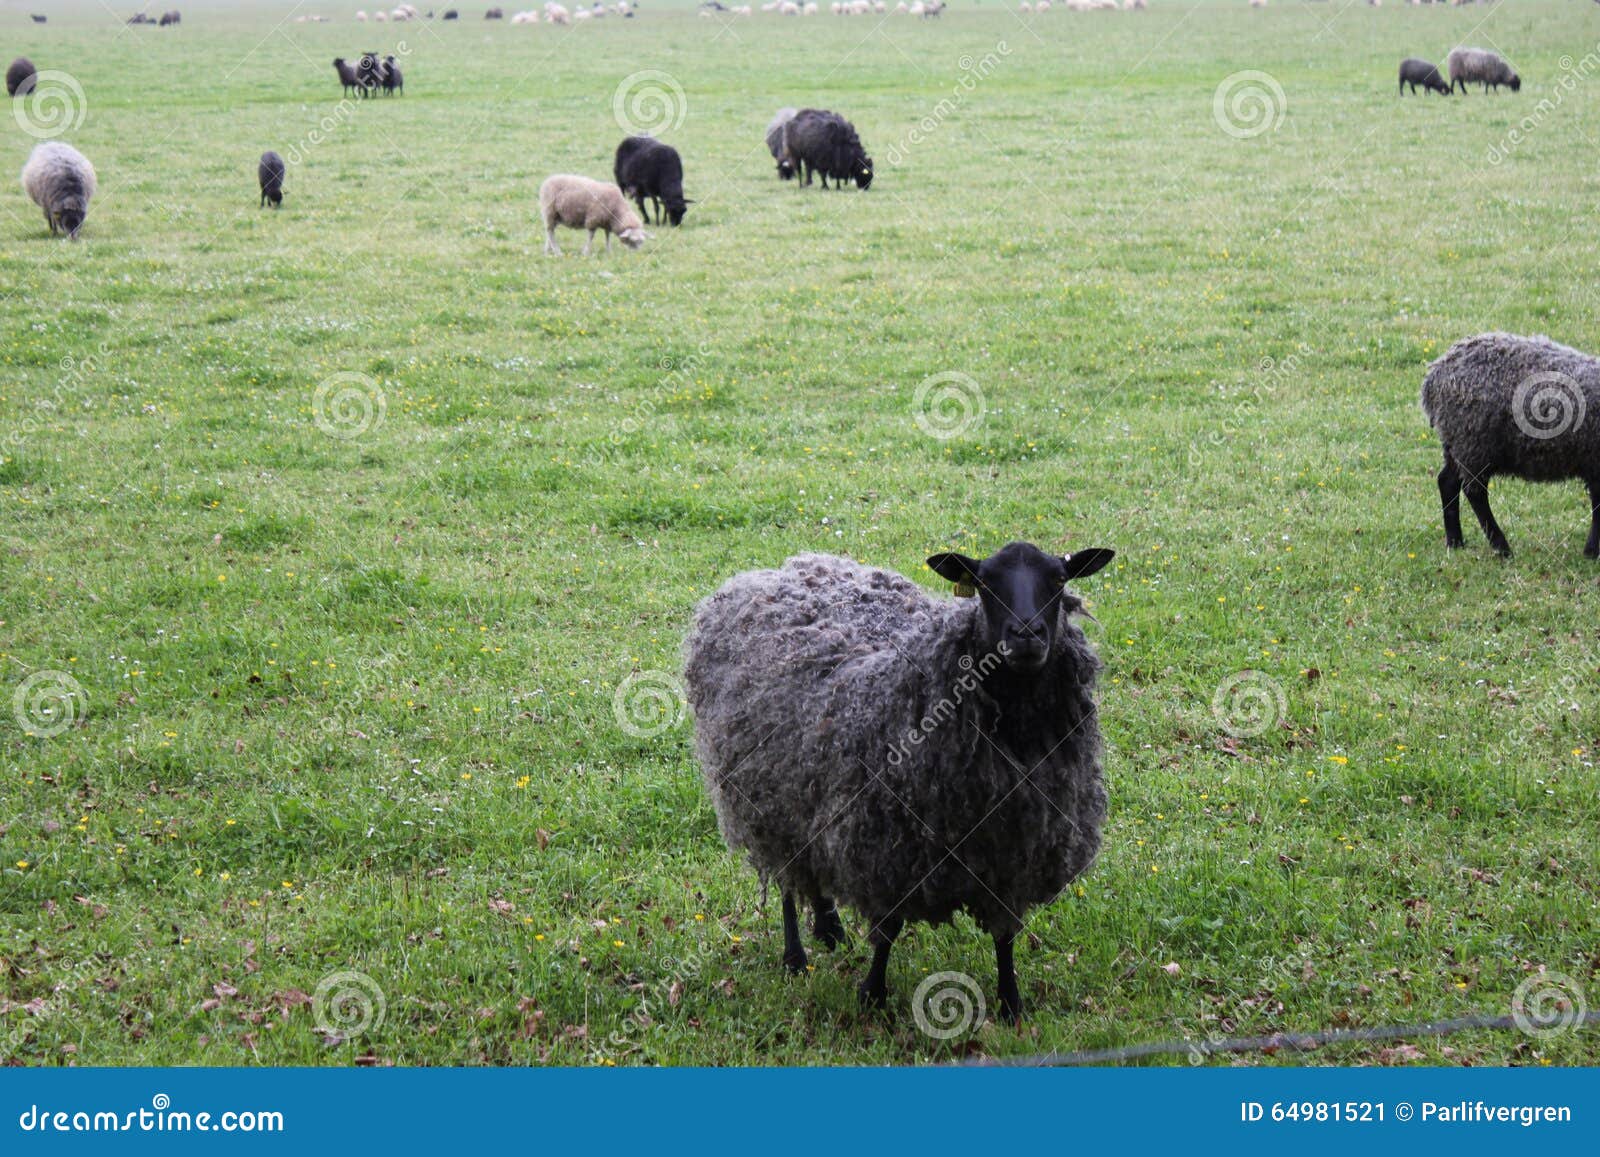 Sheep stock image. Image of country, sheep, summer, misty - 64981521